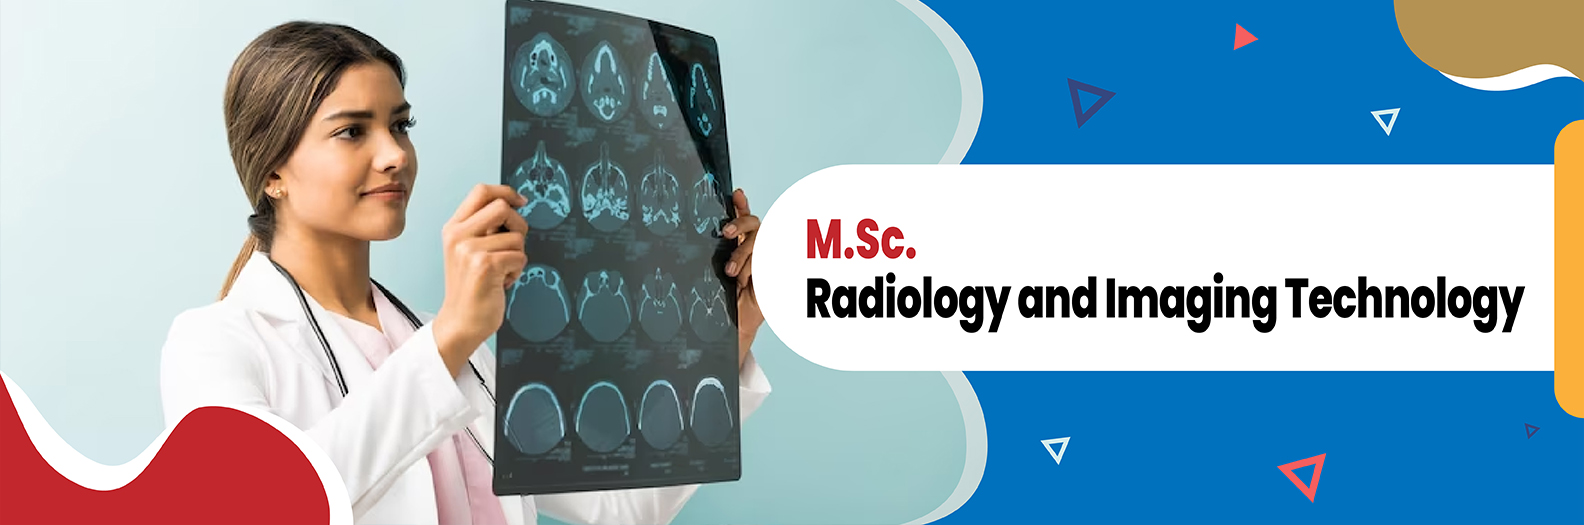 M.Sc. Radiology and Imaging Technology